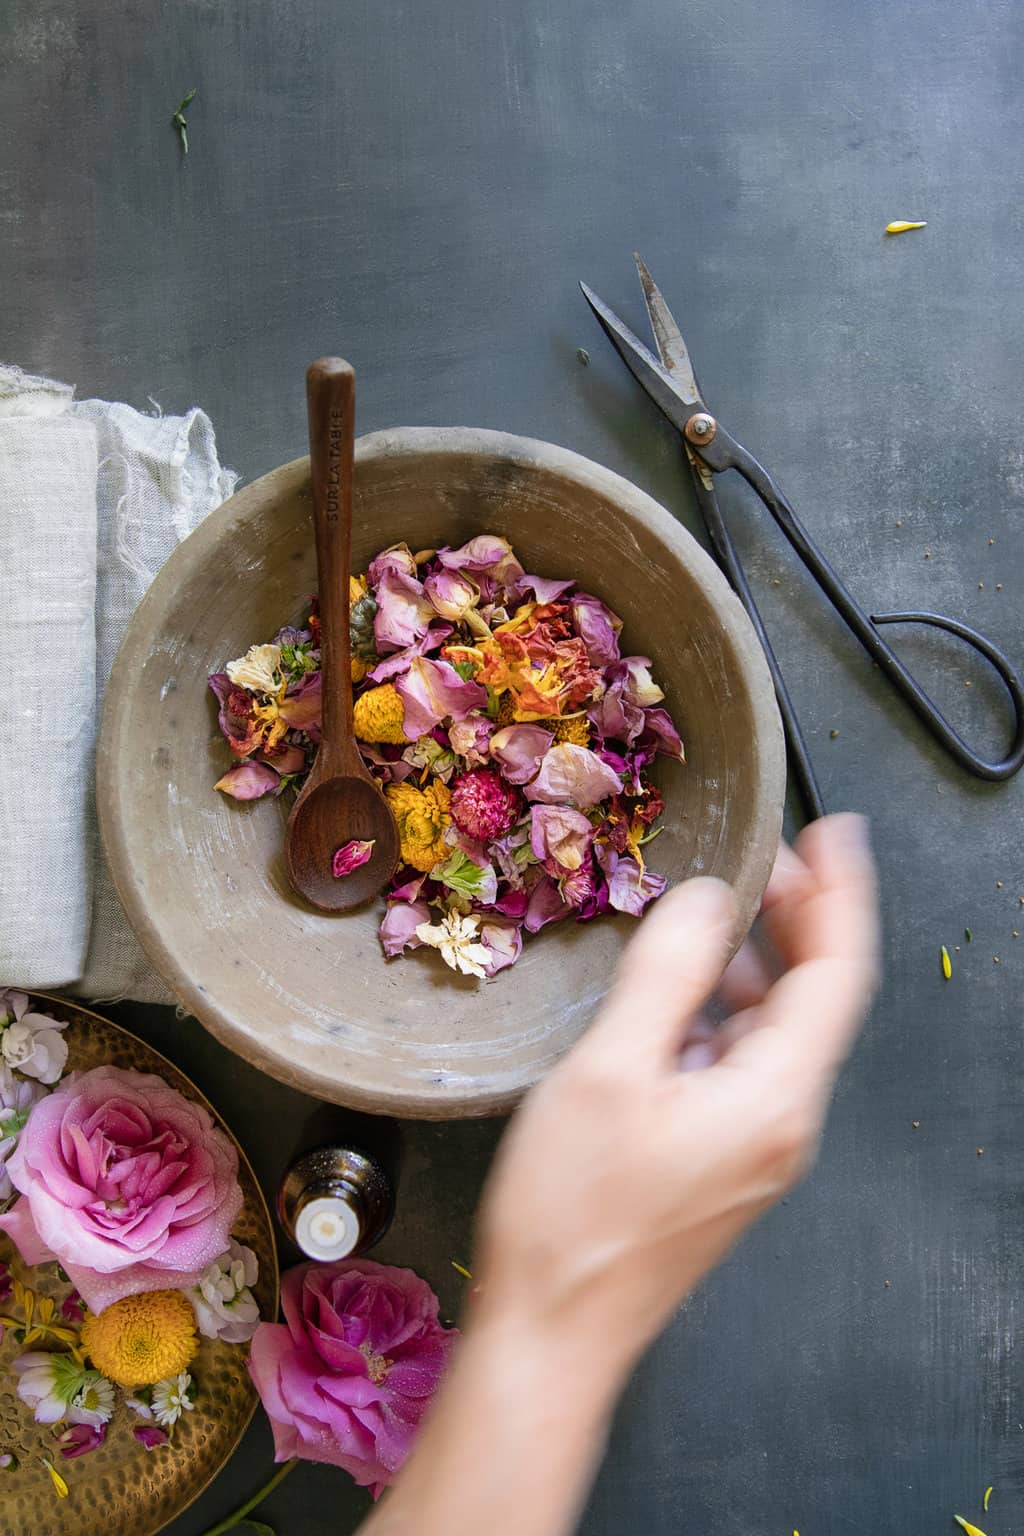 How To Dry Flowers + Make Your Own Naturally Scented Homemade Potpourri